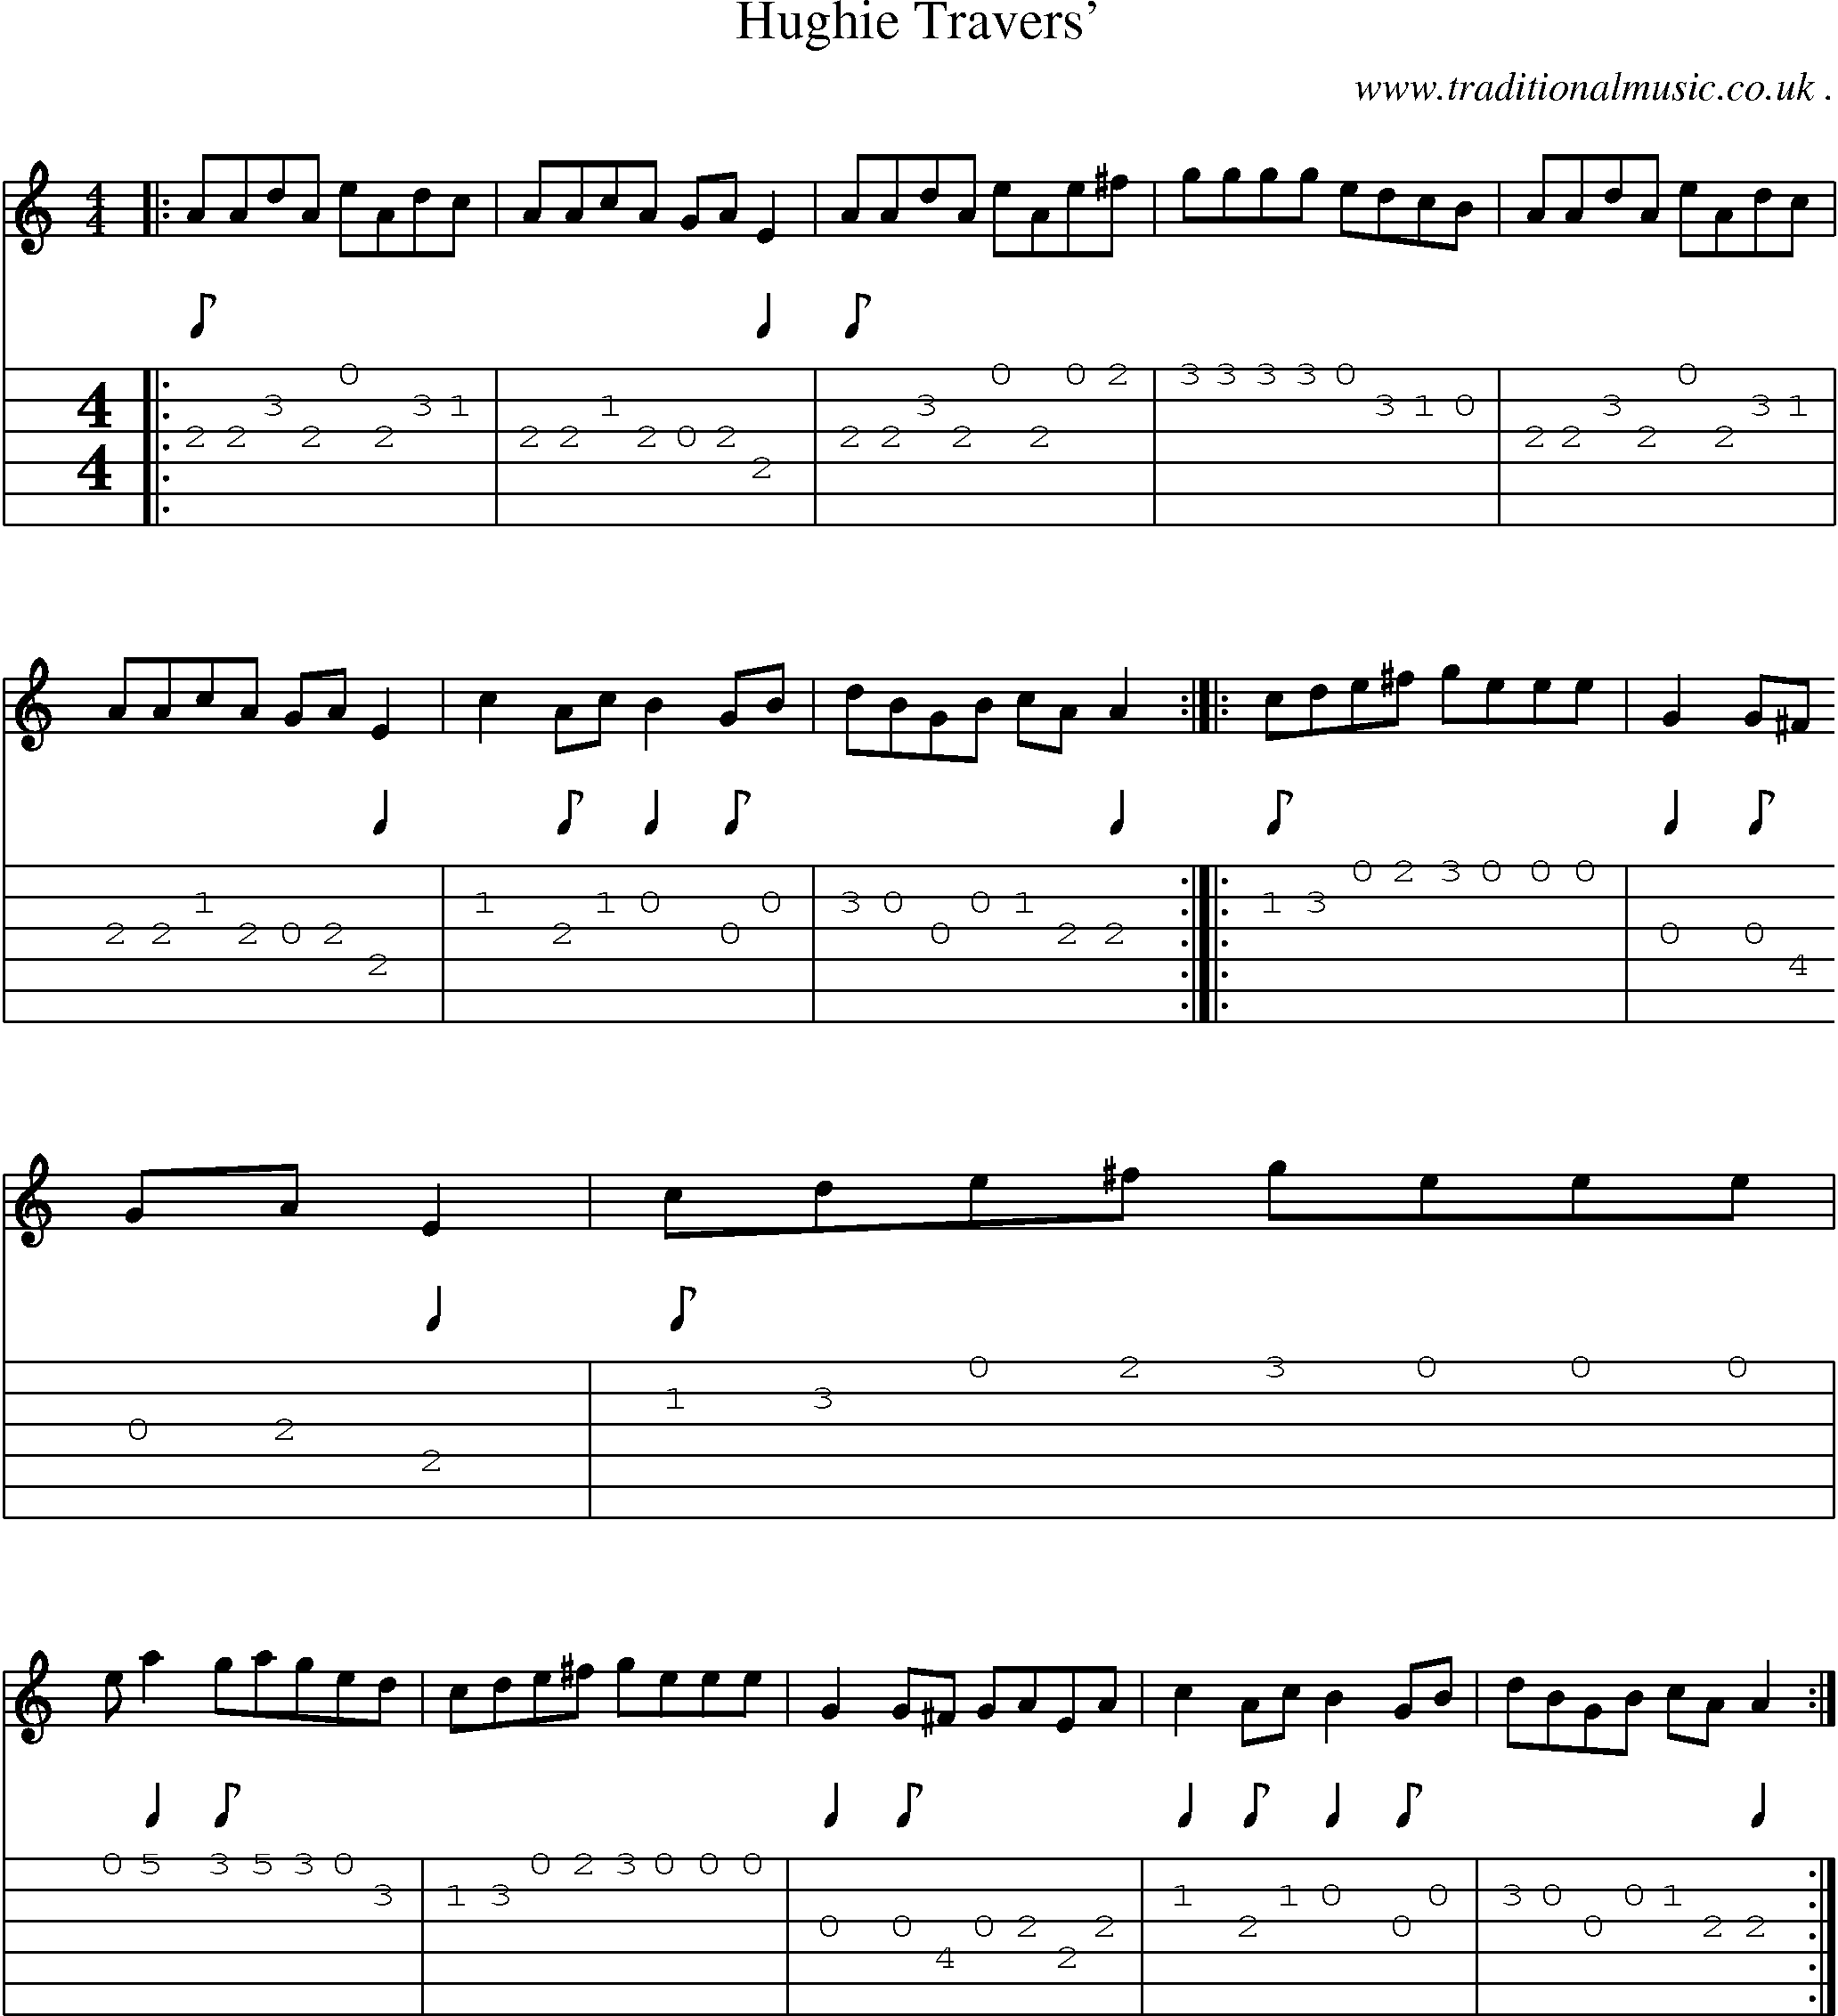 Music Score and Guitar Tabs for Hughie Travers